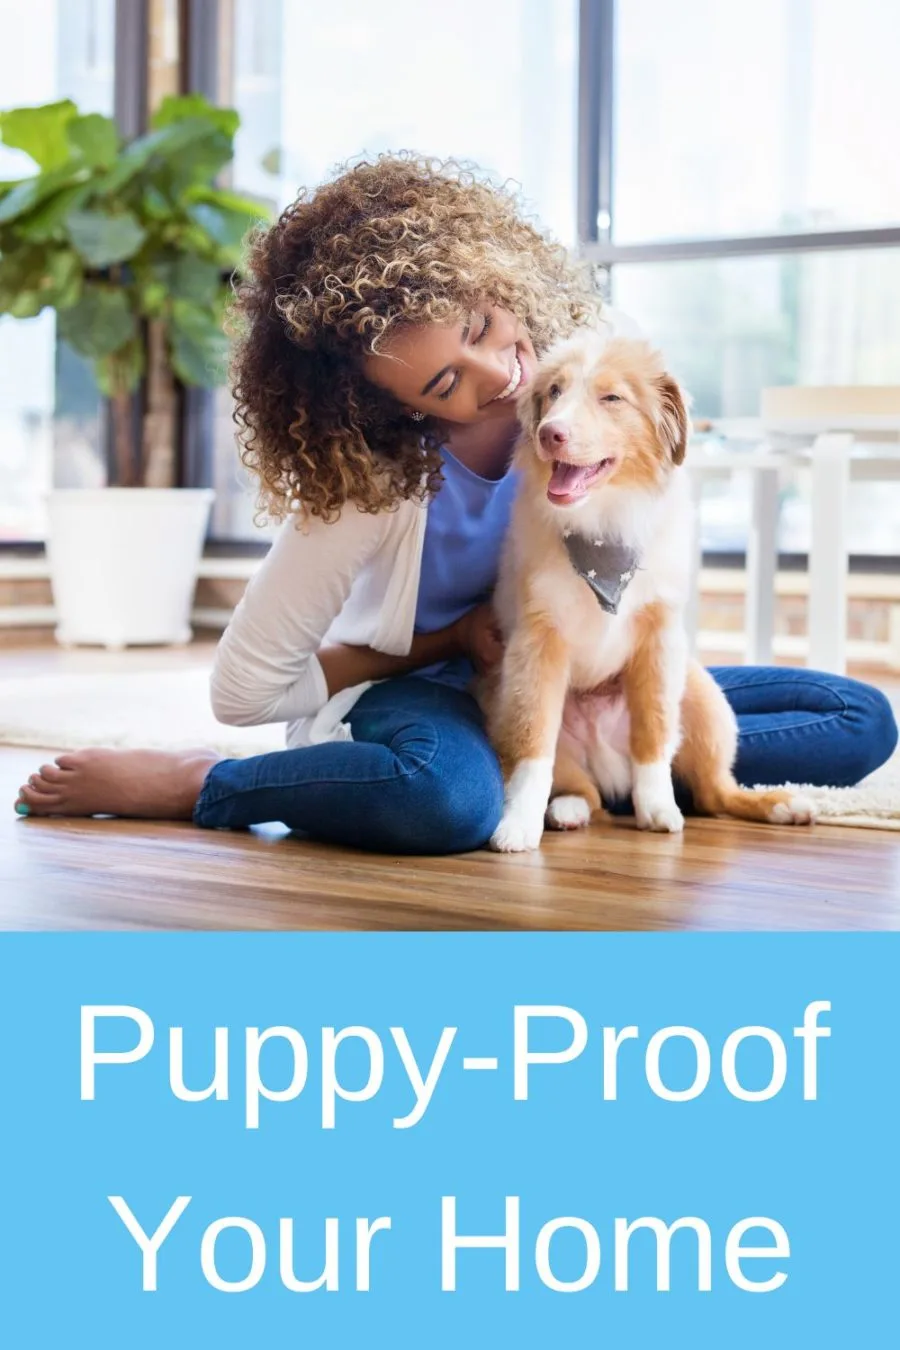 Best Practices to Puppy-Proof Your Home